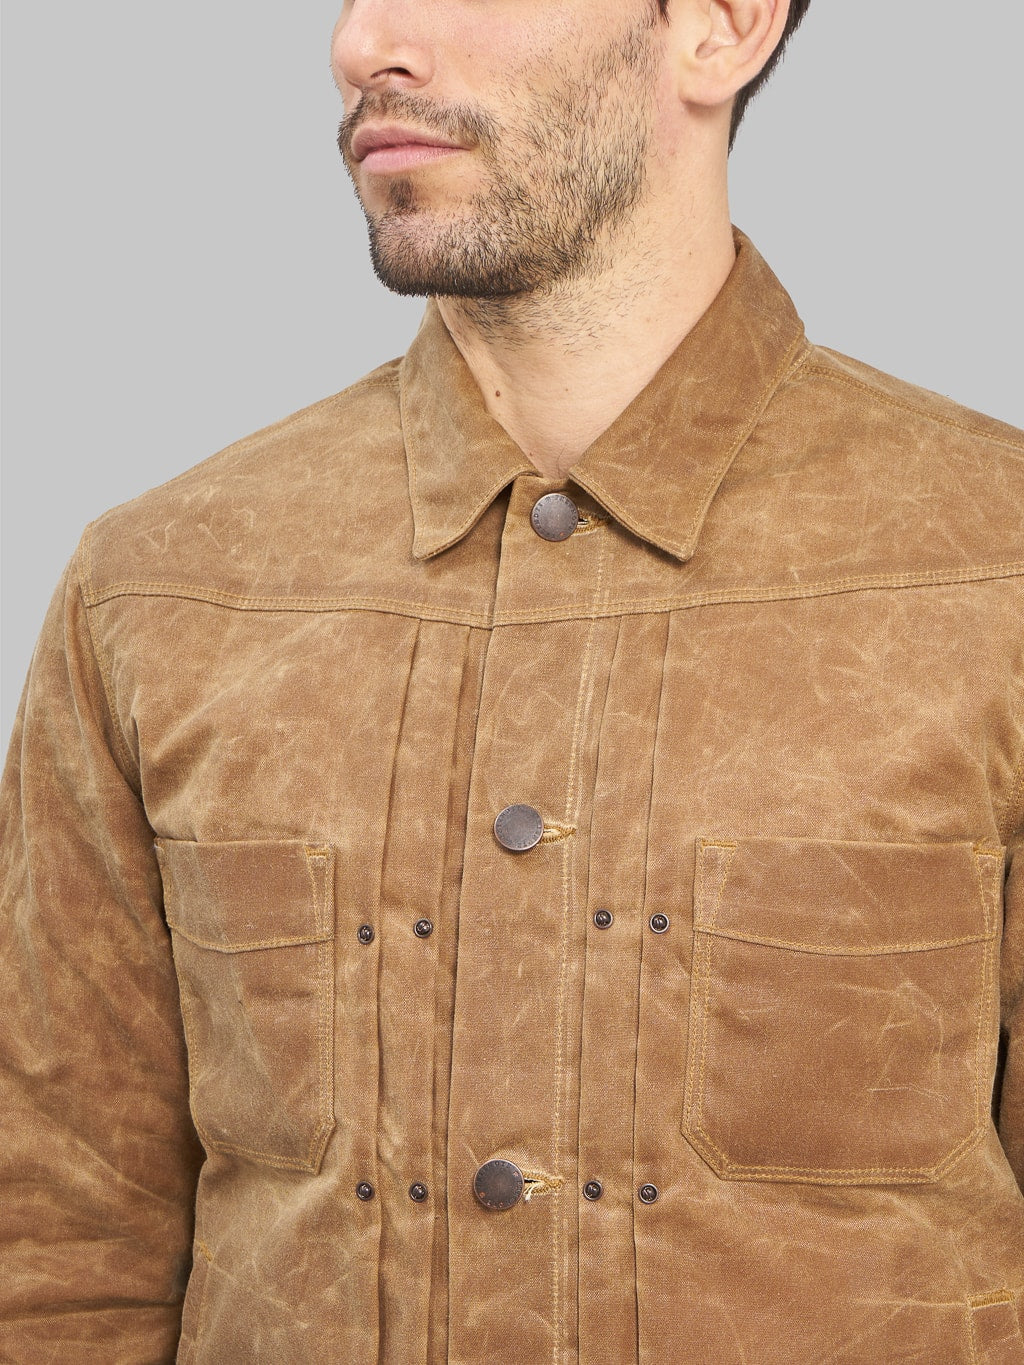 Freenote Cloth Riders Jacket Waxed Canvas Rust chest details